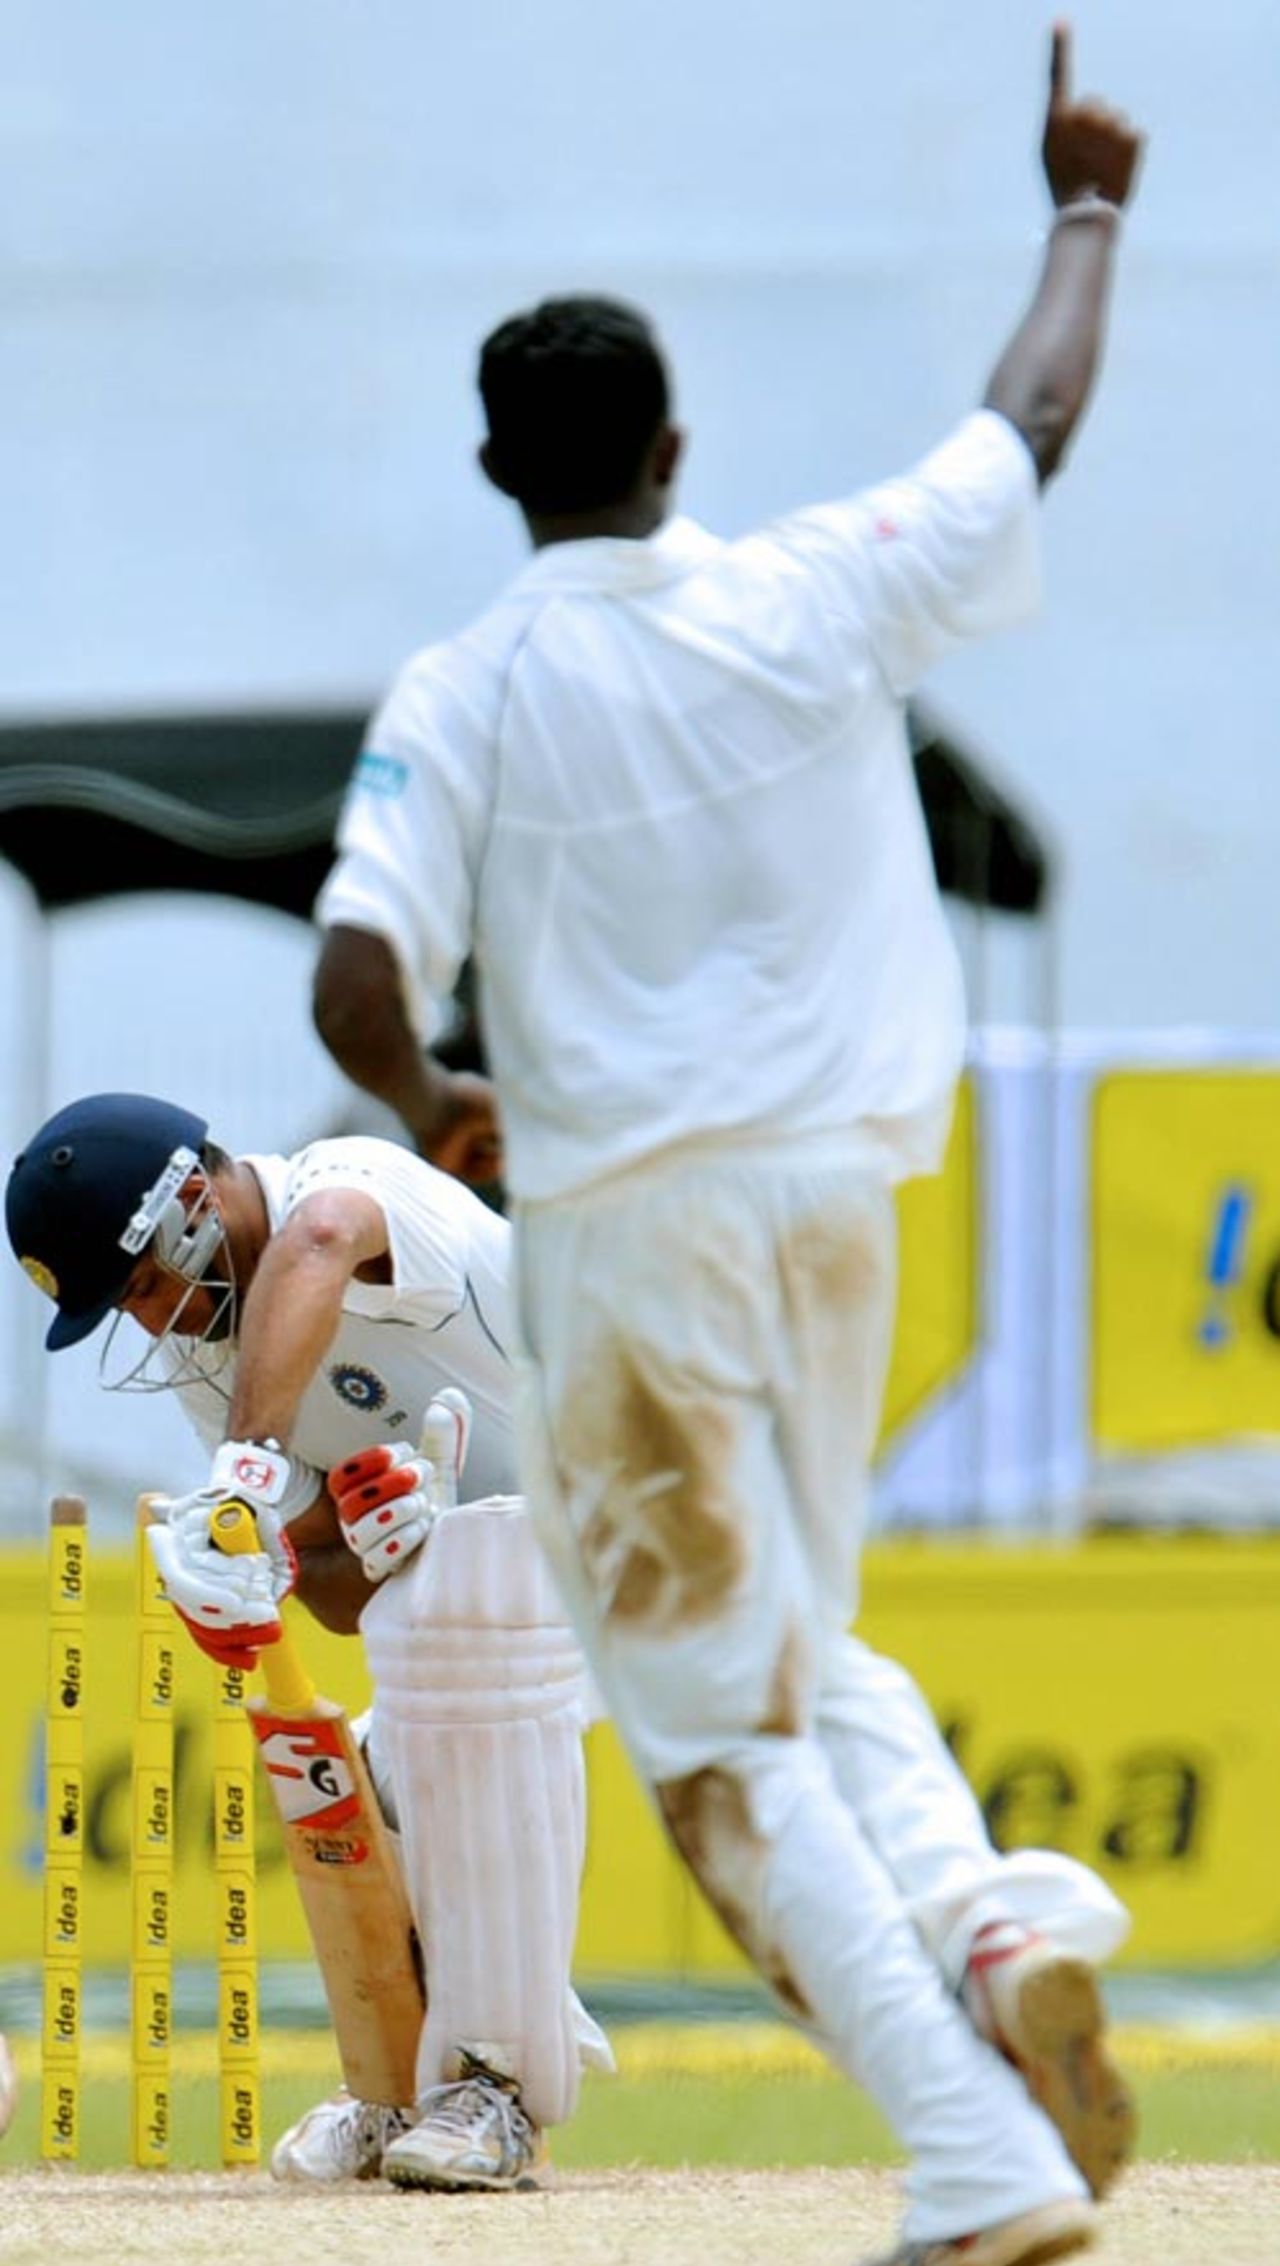 Ajantha Mendis is cock-a-hoop after foxing VVS Laxman, Sri Lanka v India, 1st Test, SSC, Colombo, 4th day, July 26, 2008